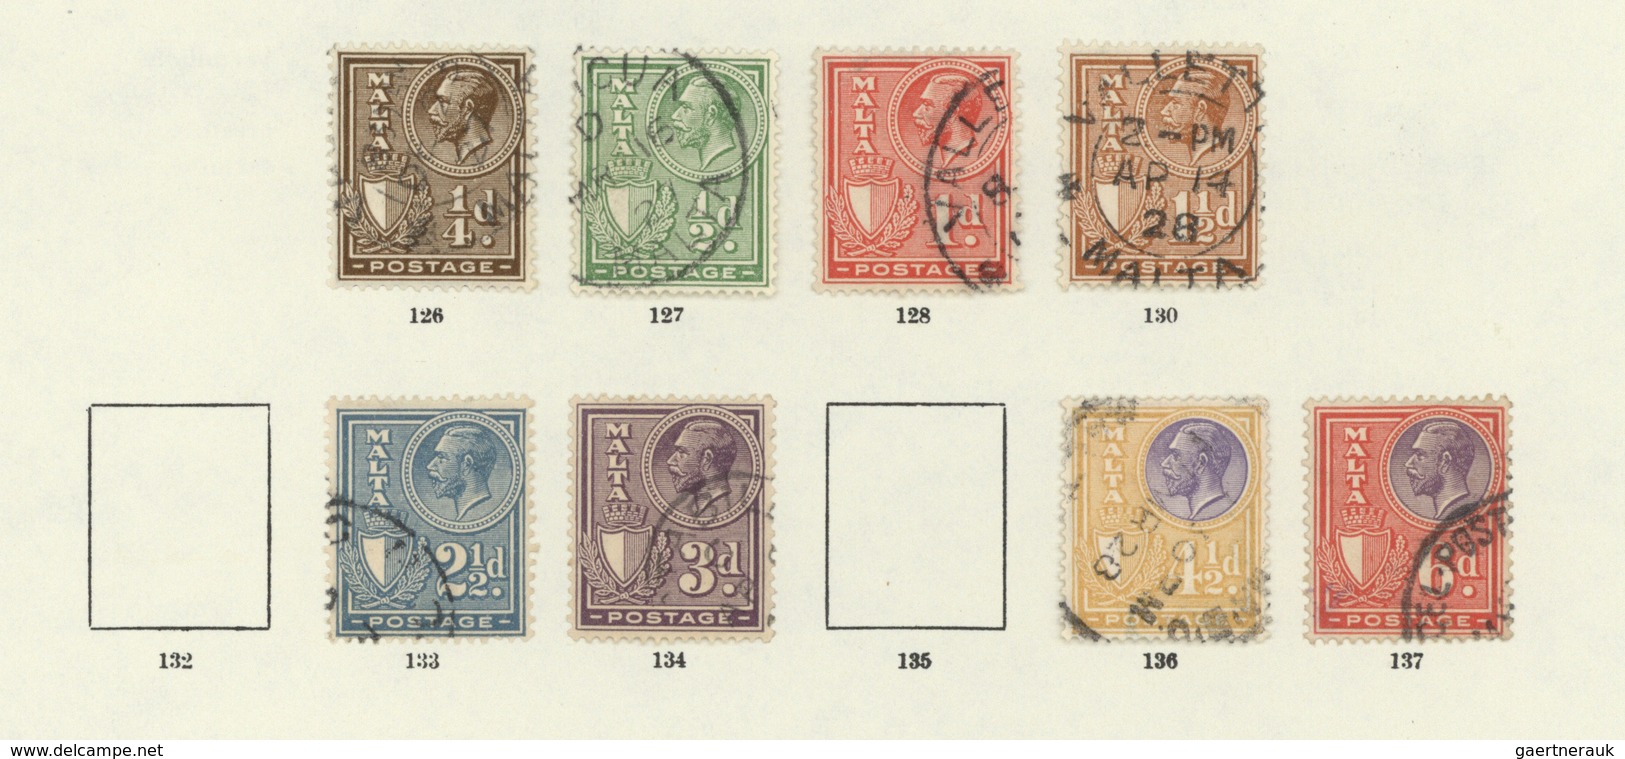 Malta: 1863-1937, Collection Of About 160 Stamps, Most Of Them Mint, Some Used, From The Early QV ½d - Malta